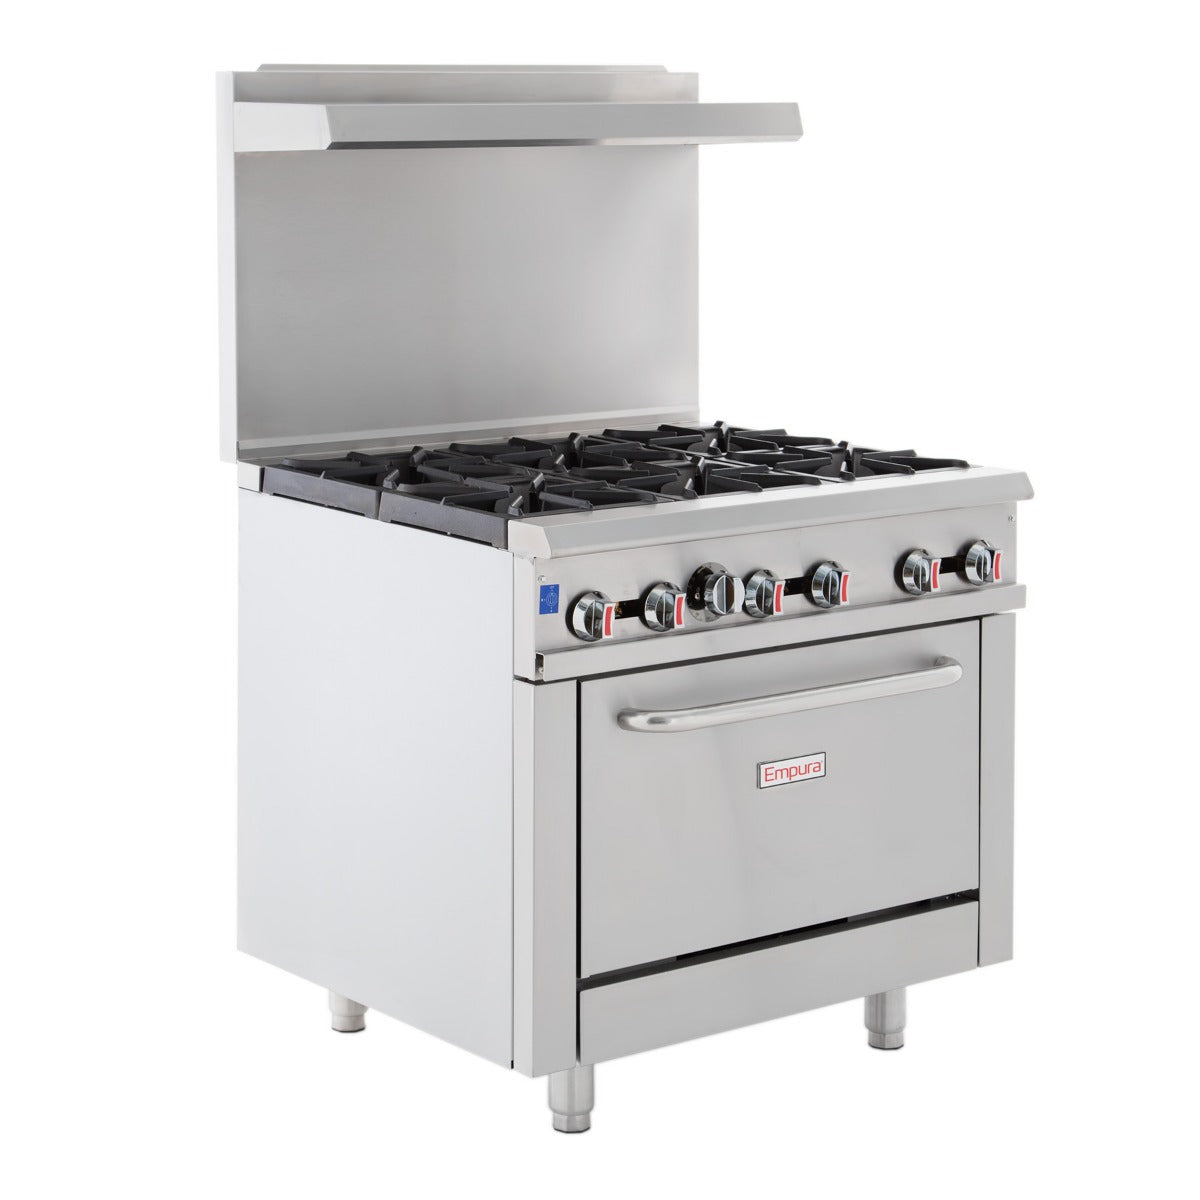 Empura EGR-36_NAT 36" Stainless Steel Commercial Gas Range with Oven, 6 Burners - Natural Gas, 210,000 BTU